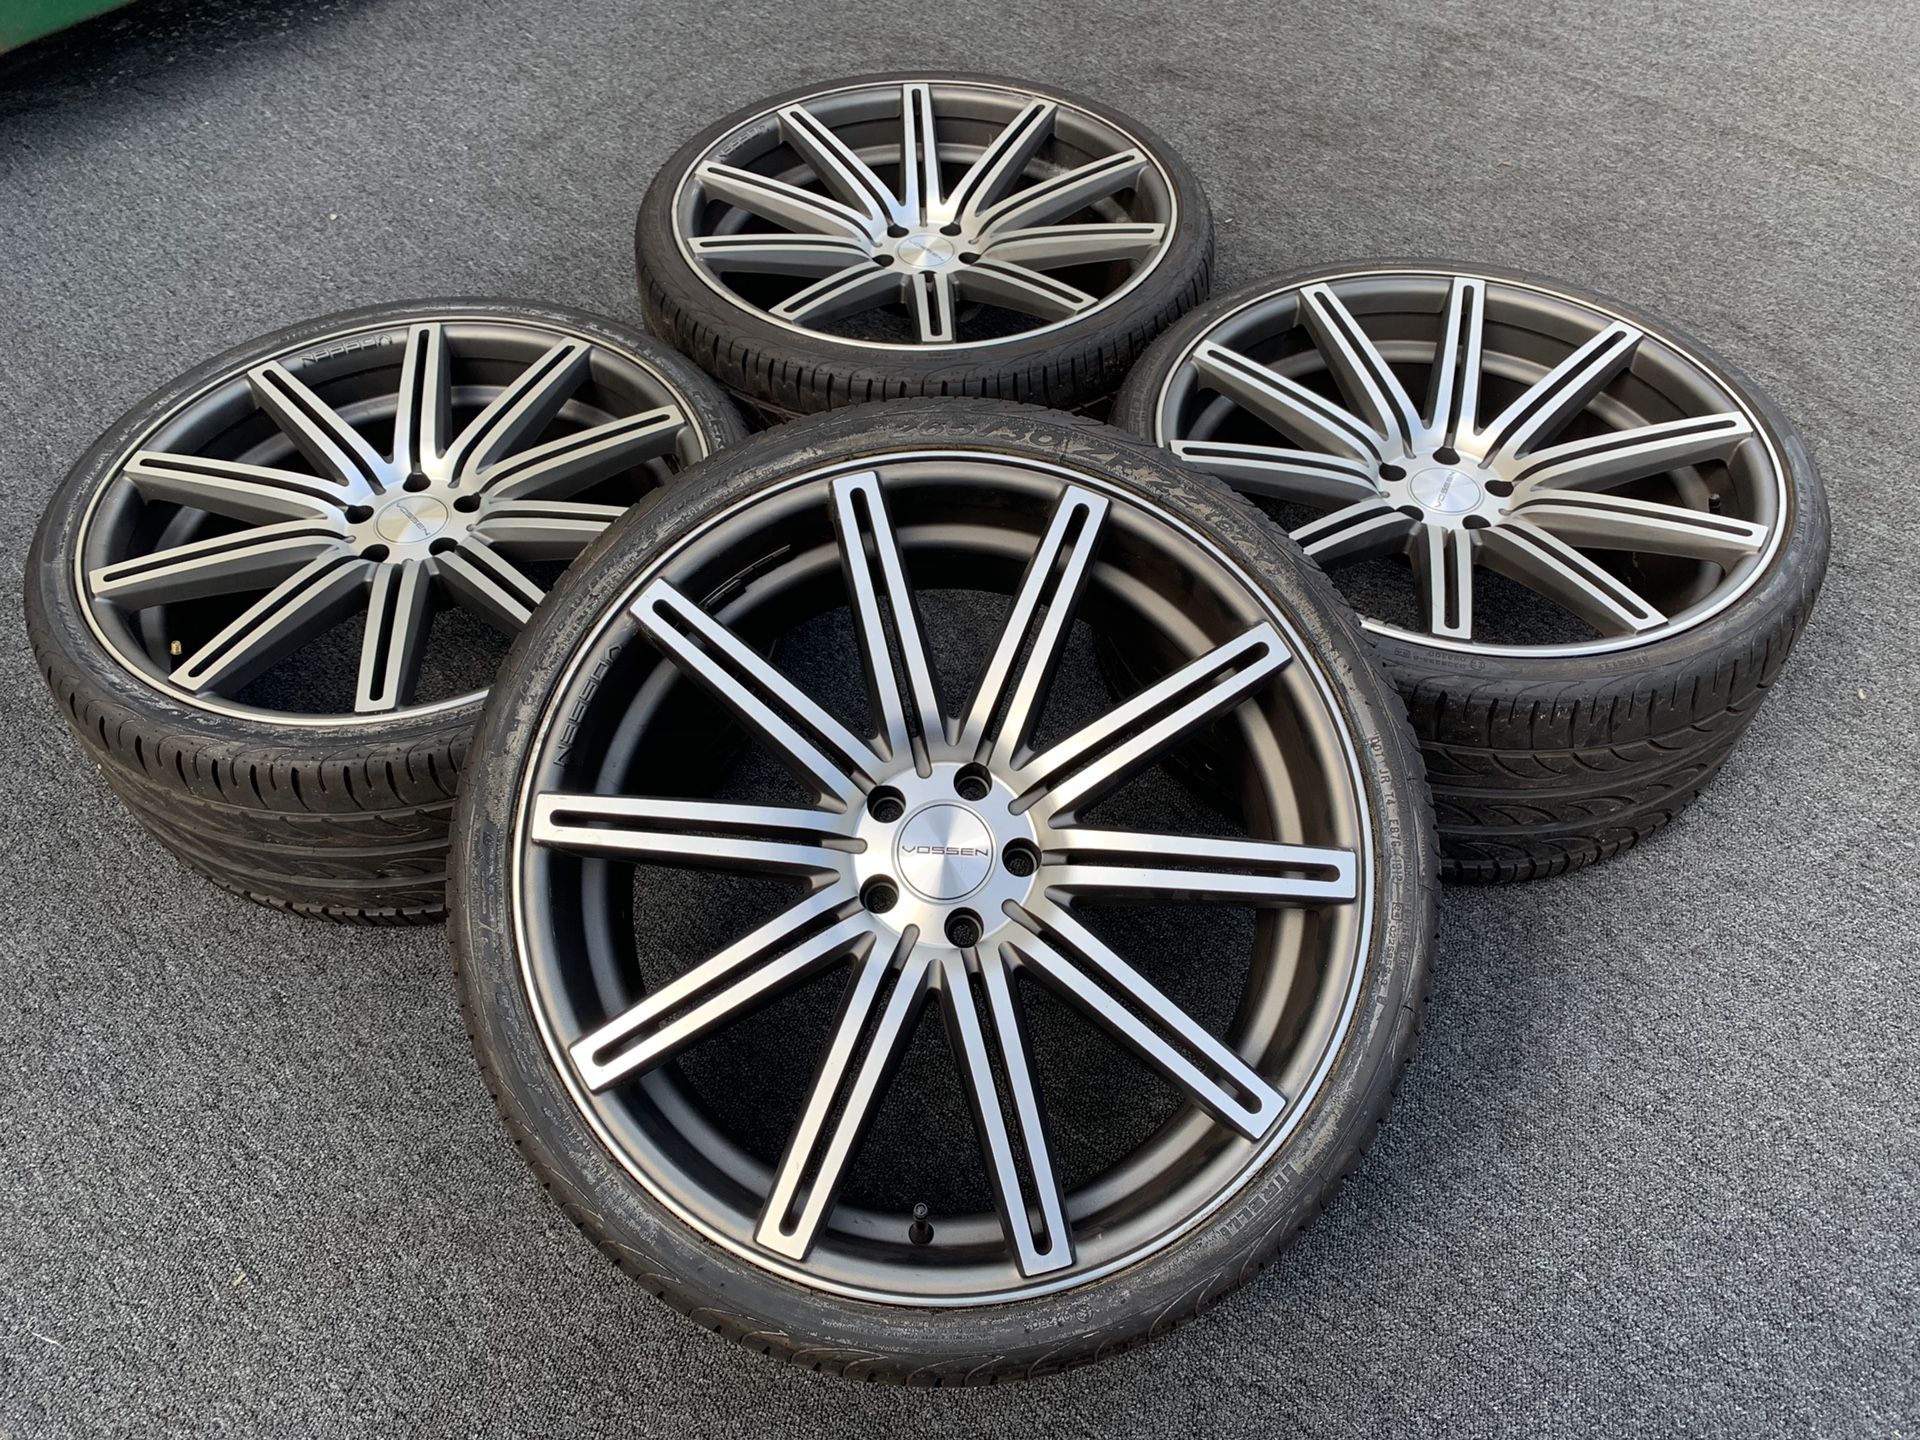 VOSSEN 22 inch MERCEDES S CLASS WHEELS AND TIRES